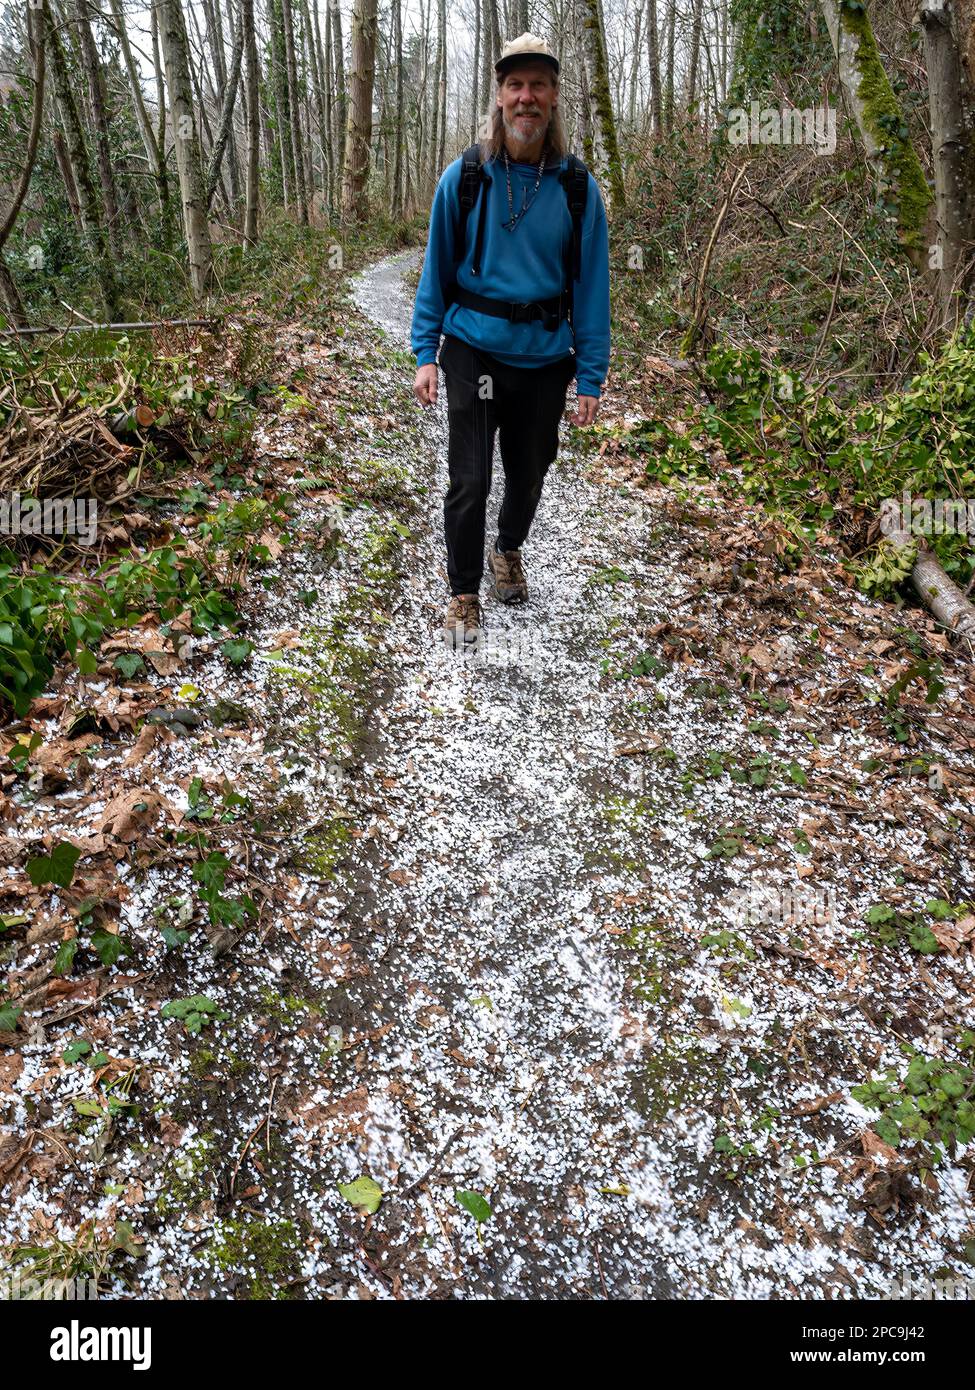 WA23252-00...WASHINGTON - Hiker  on a hail covered trail during a winter hike at the Mukilteo Trails and Tails Dog Park. Stock Photo